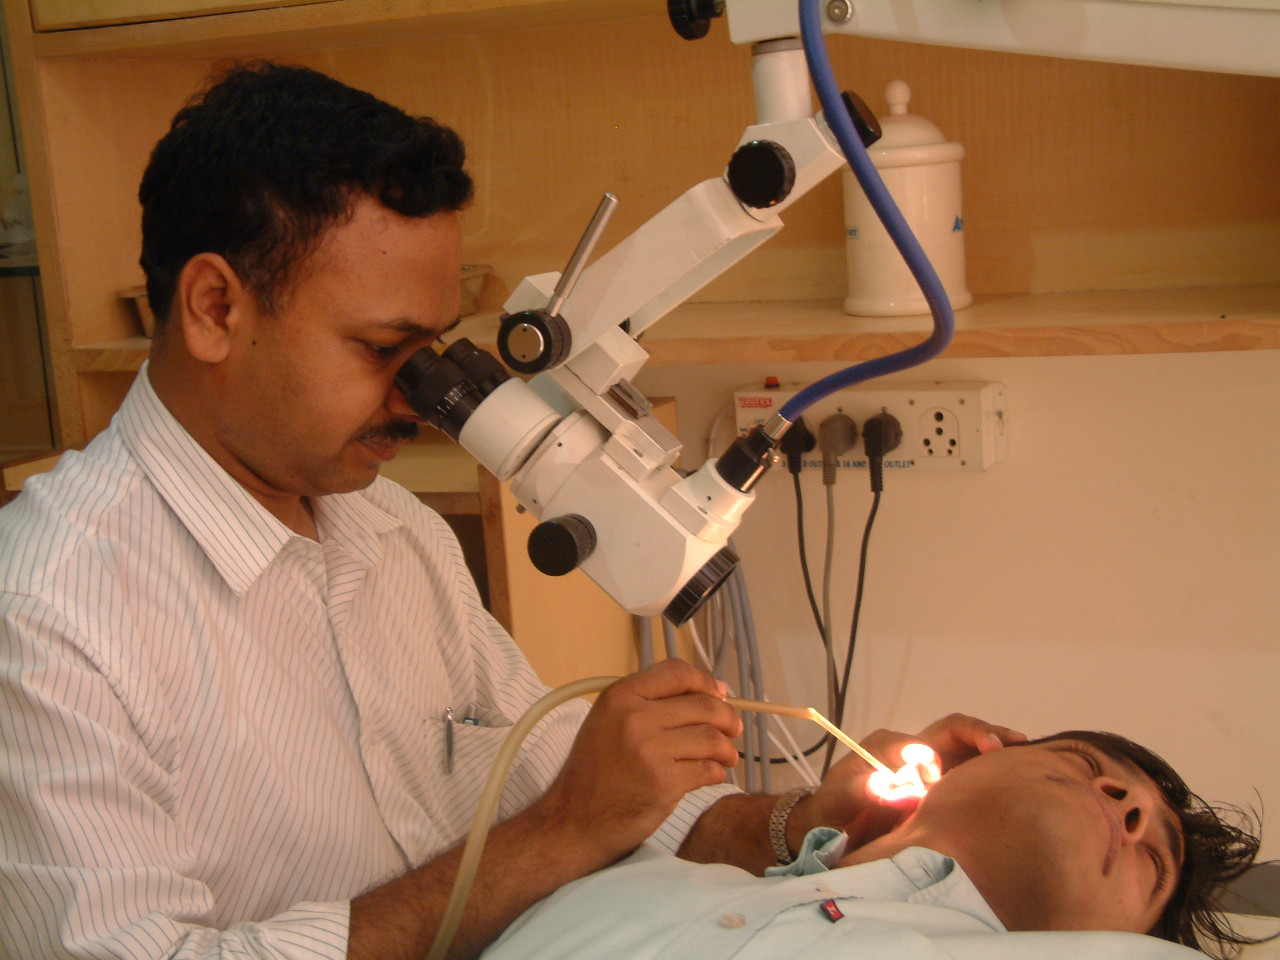 Ajay working with Microscope